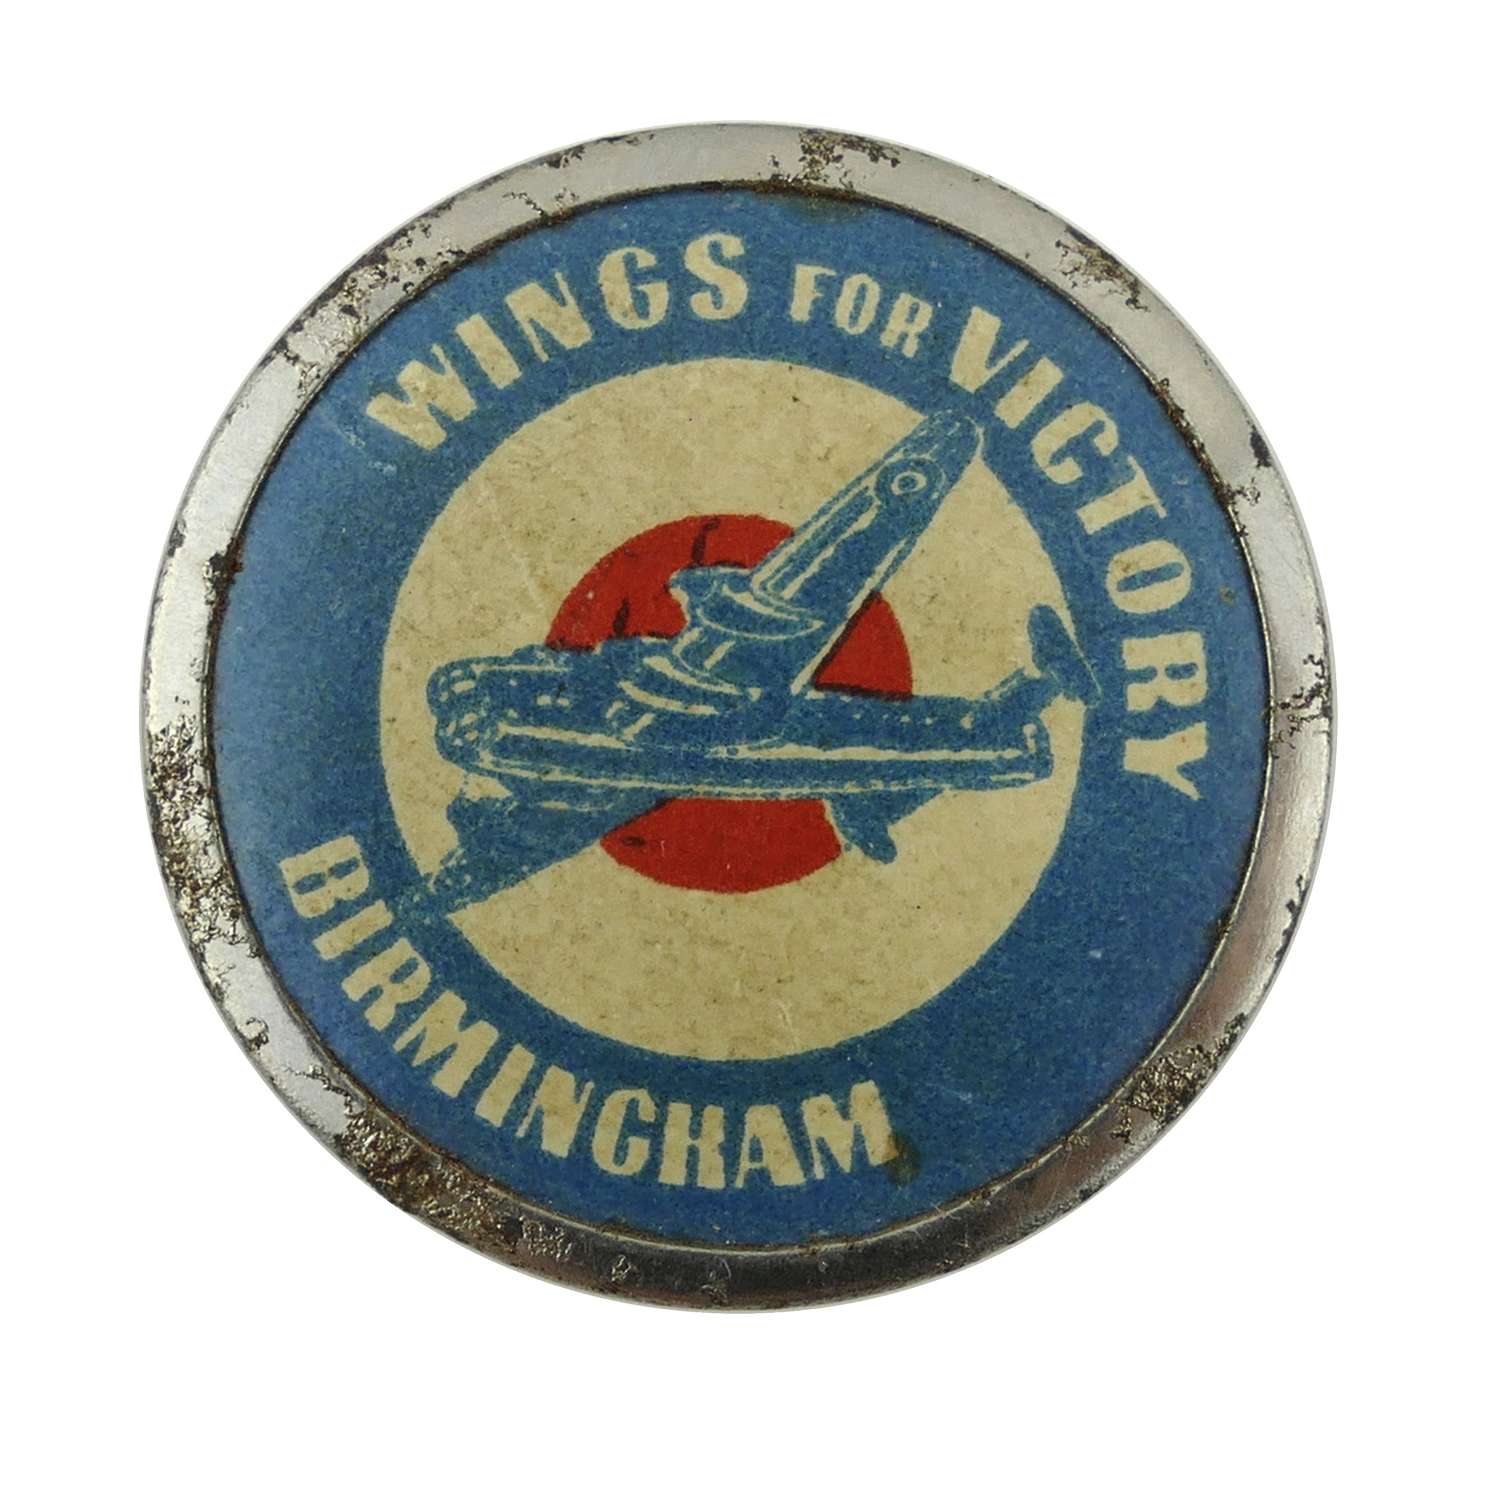 Wings for Victory badge